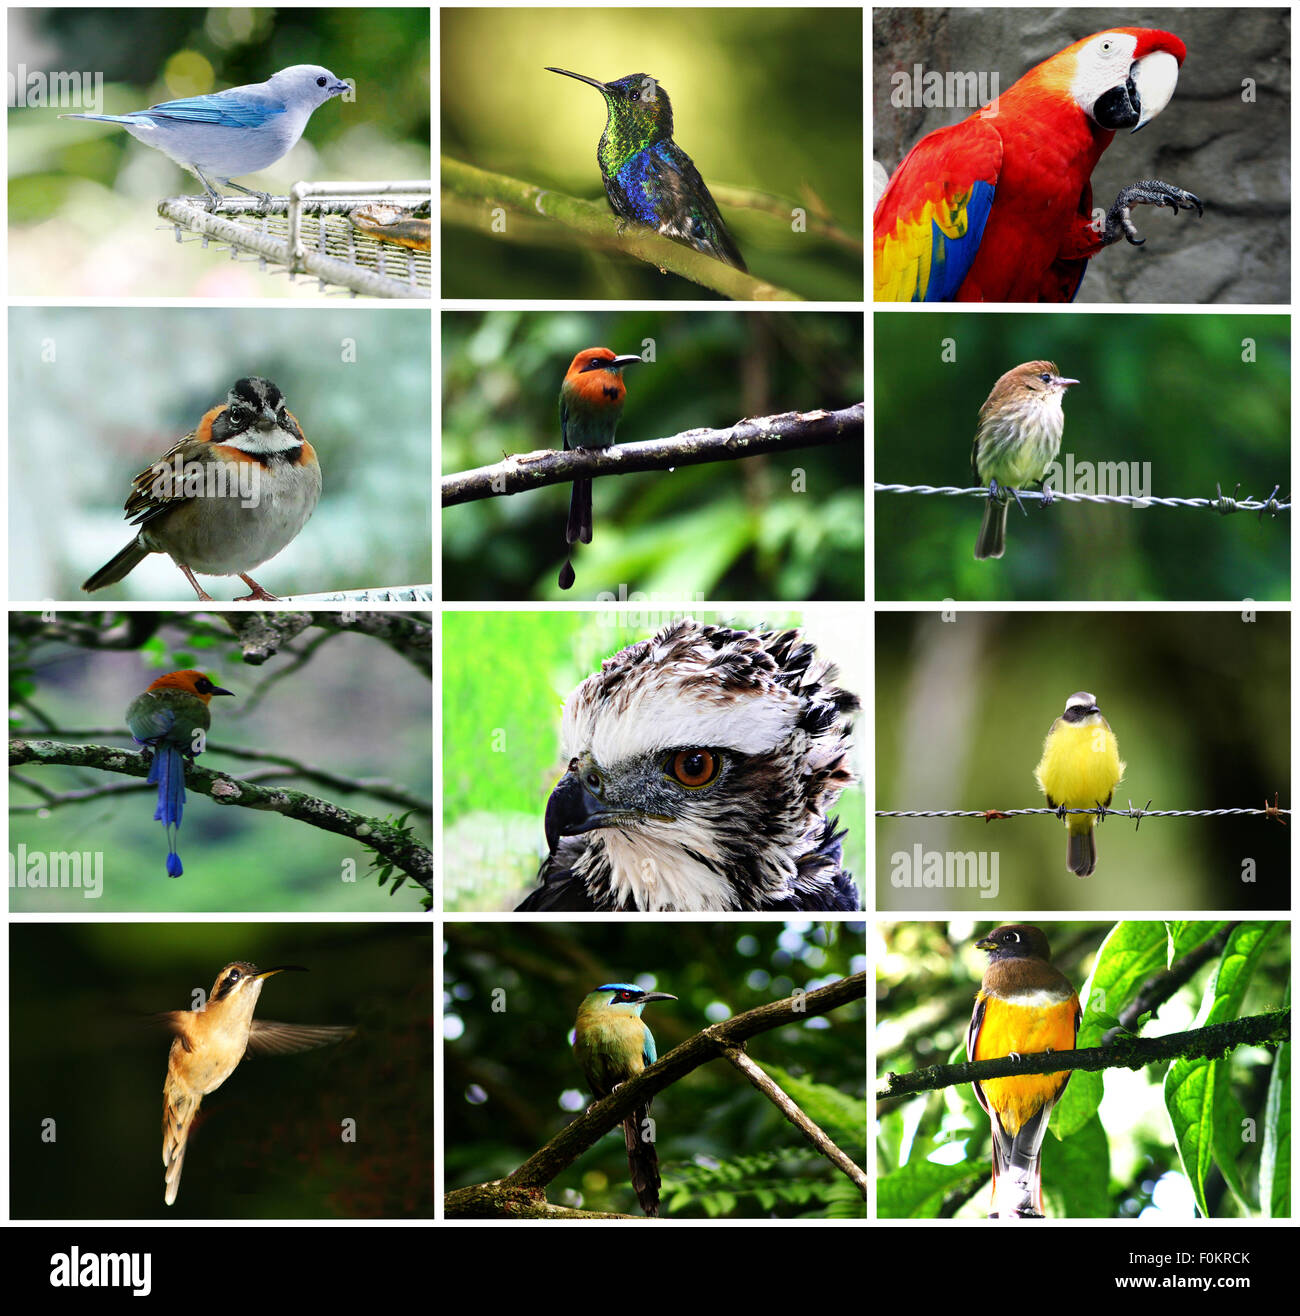 Beautiful collection of birds from Panama together in a collage Stock Photo